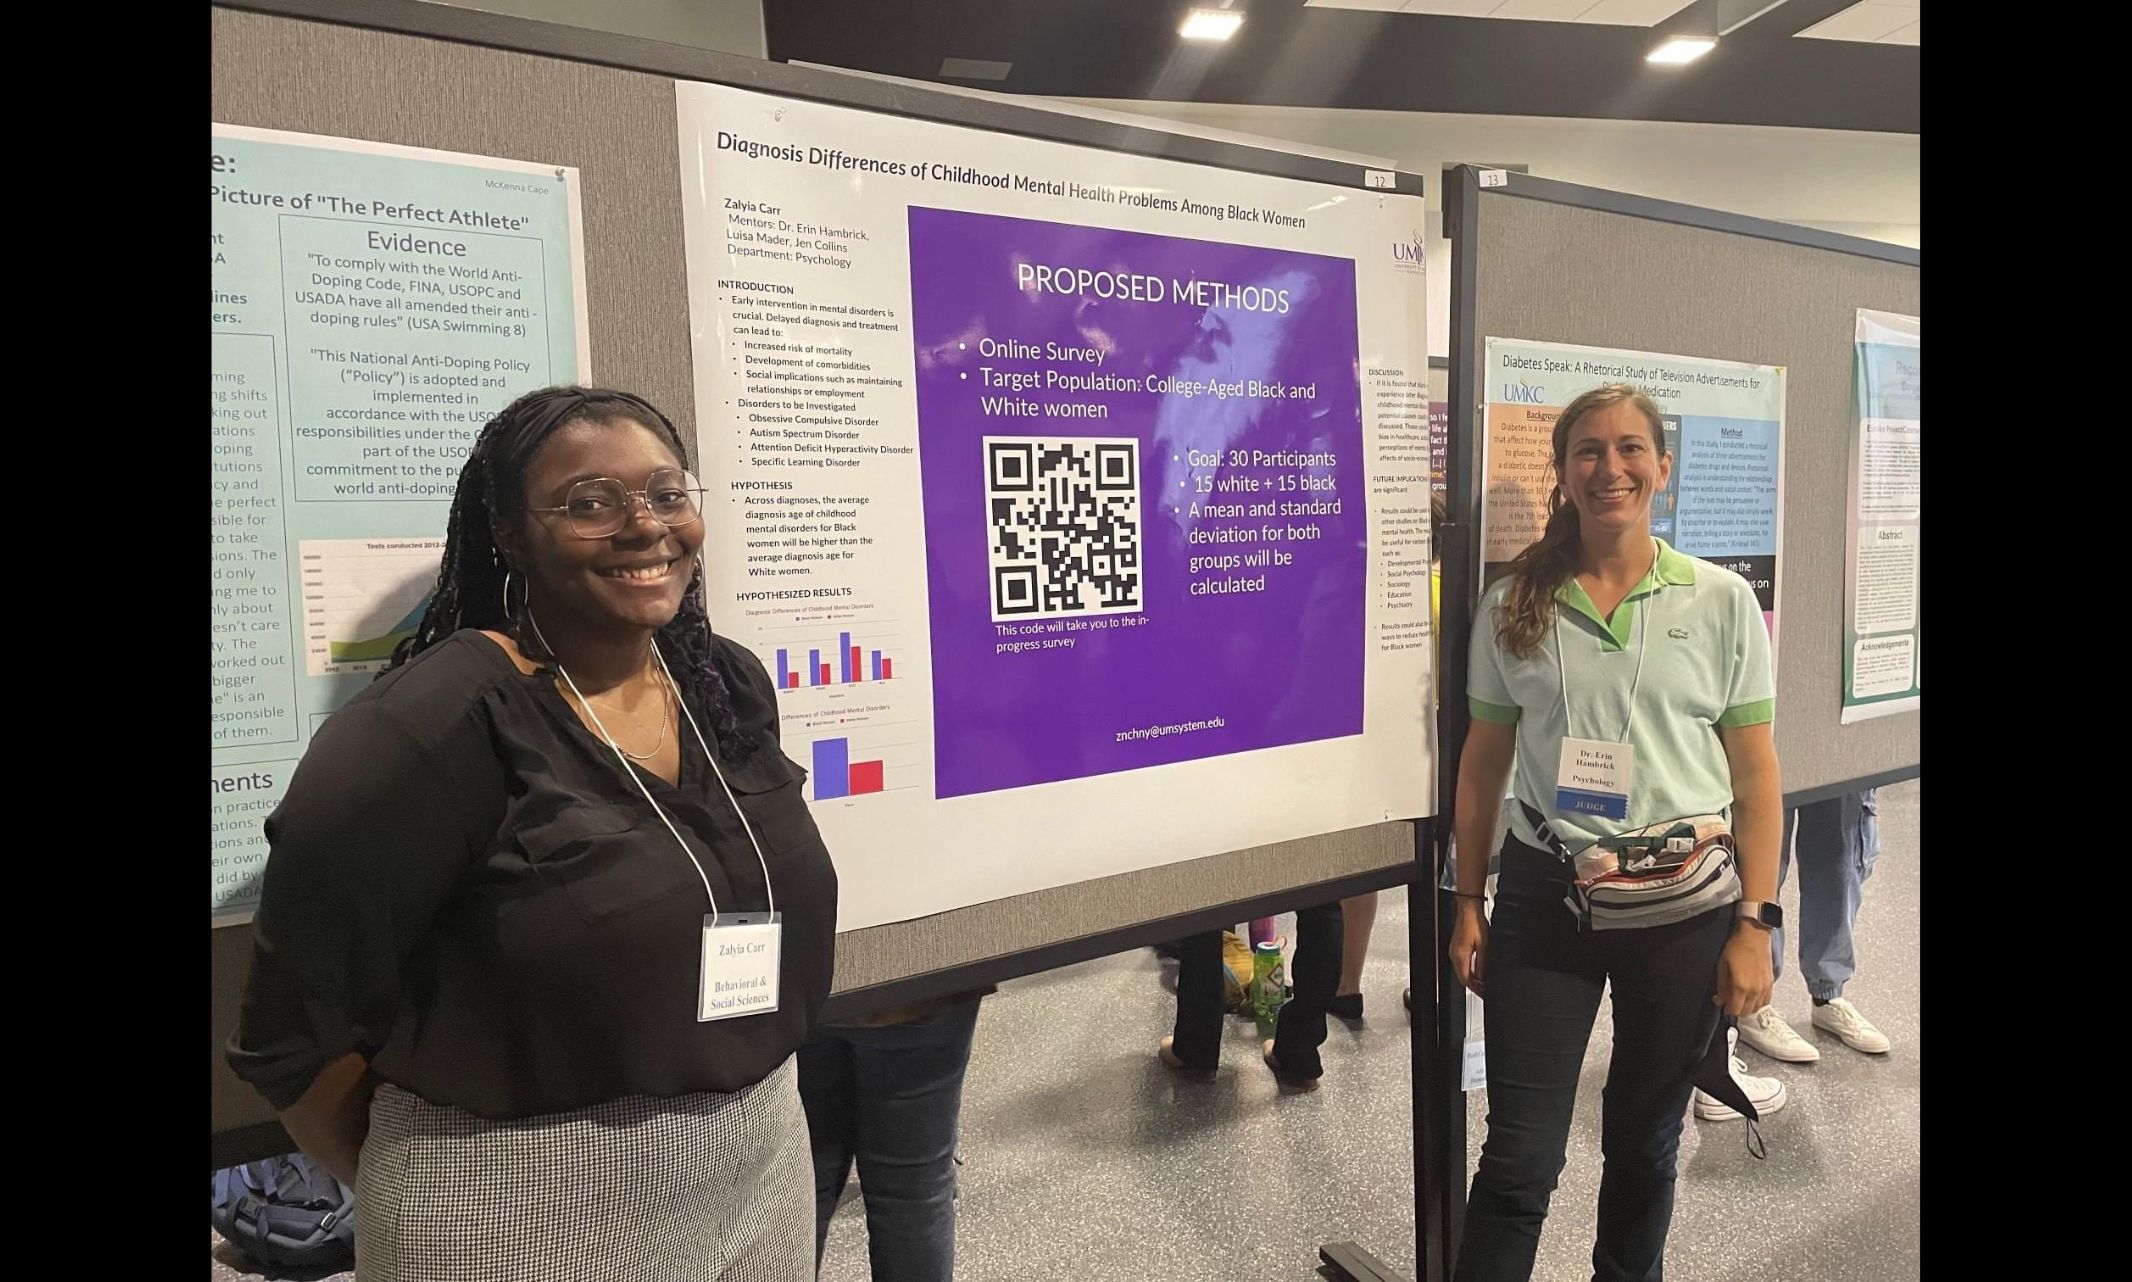 Child Psychologist and UMKC professor Erin Hambrick is with former student Zalyia Carr at the SEARCH undergraduate research program at UMKC. They is standing in front of her research paper with Erin Hambrick at the back